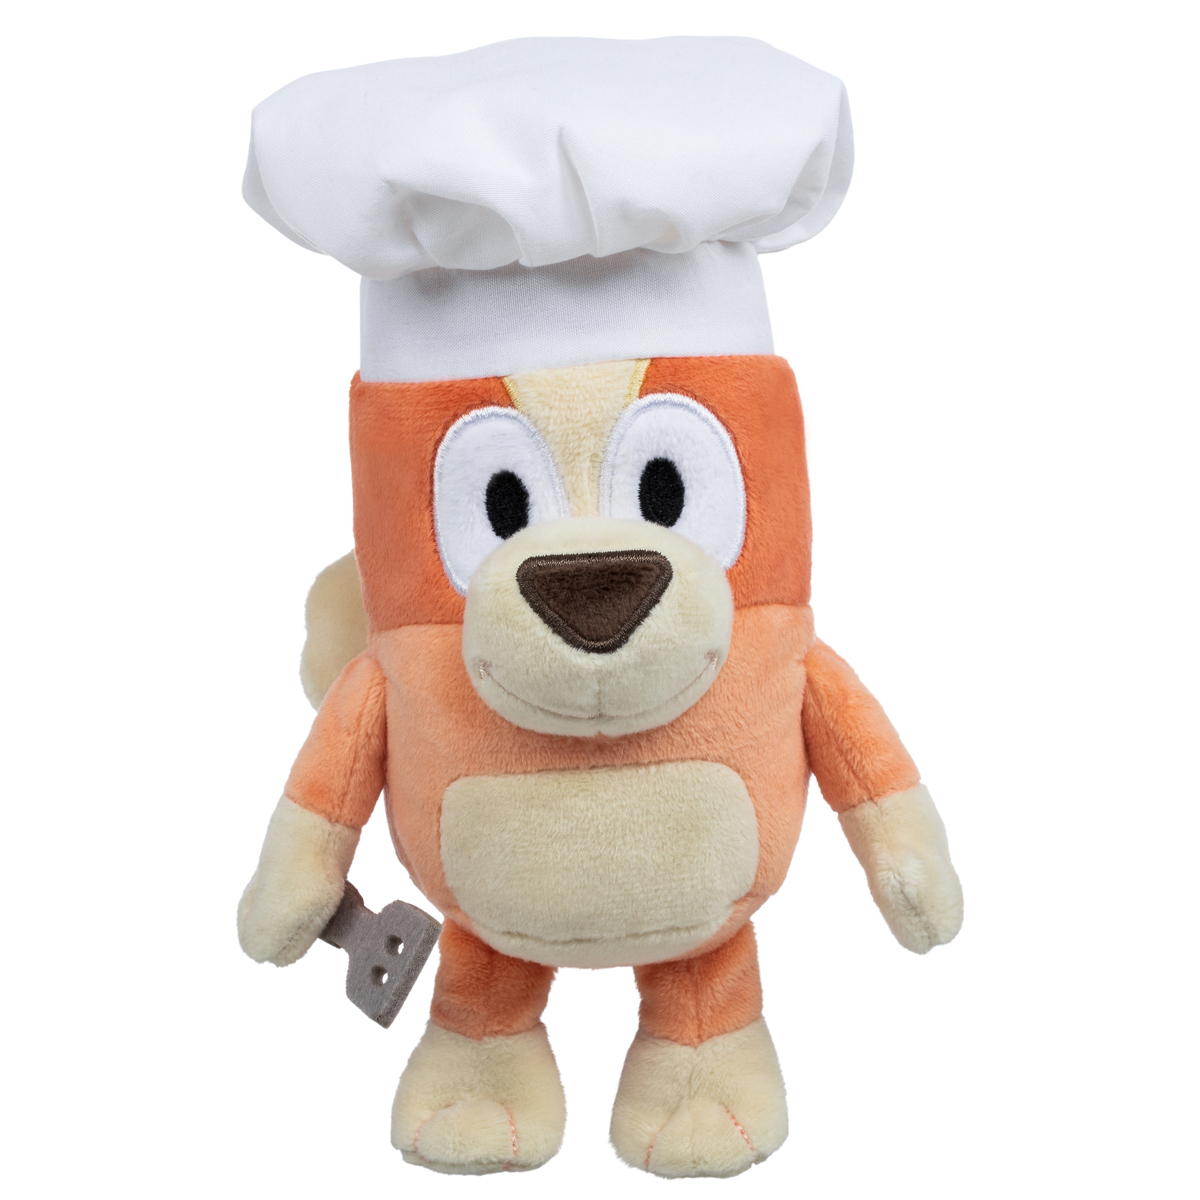 Bluey and Friends - Chef Bingo 22cm Soft Toy | Early Learning Centre